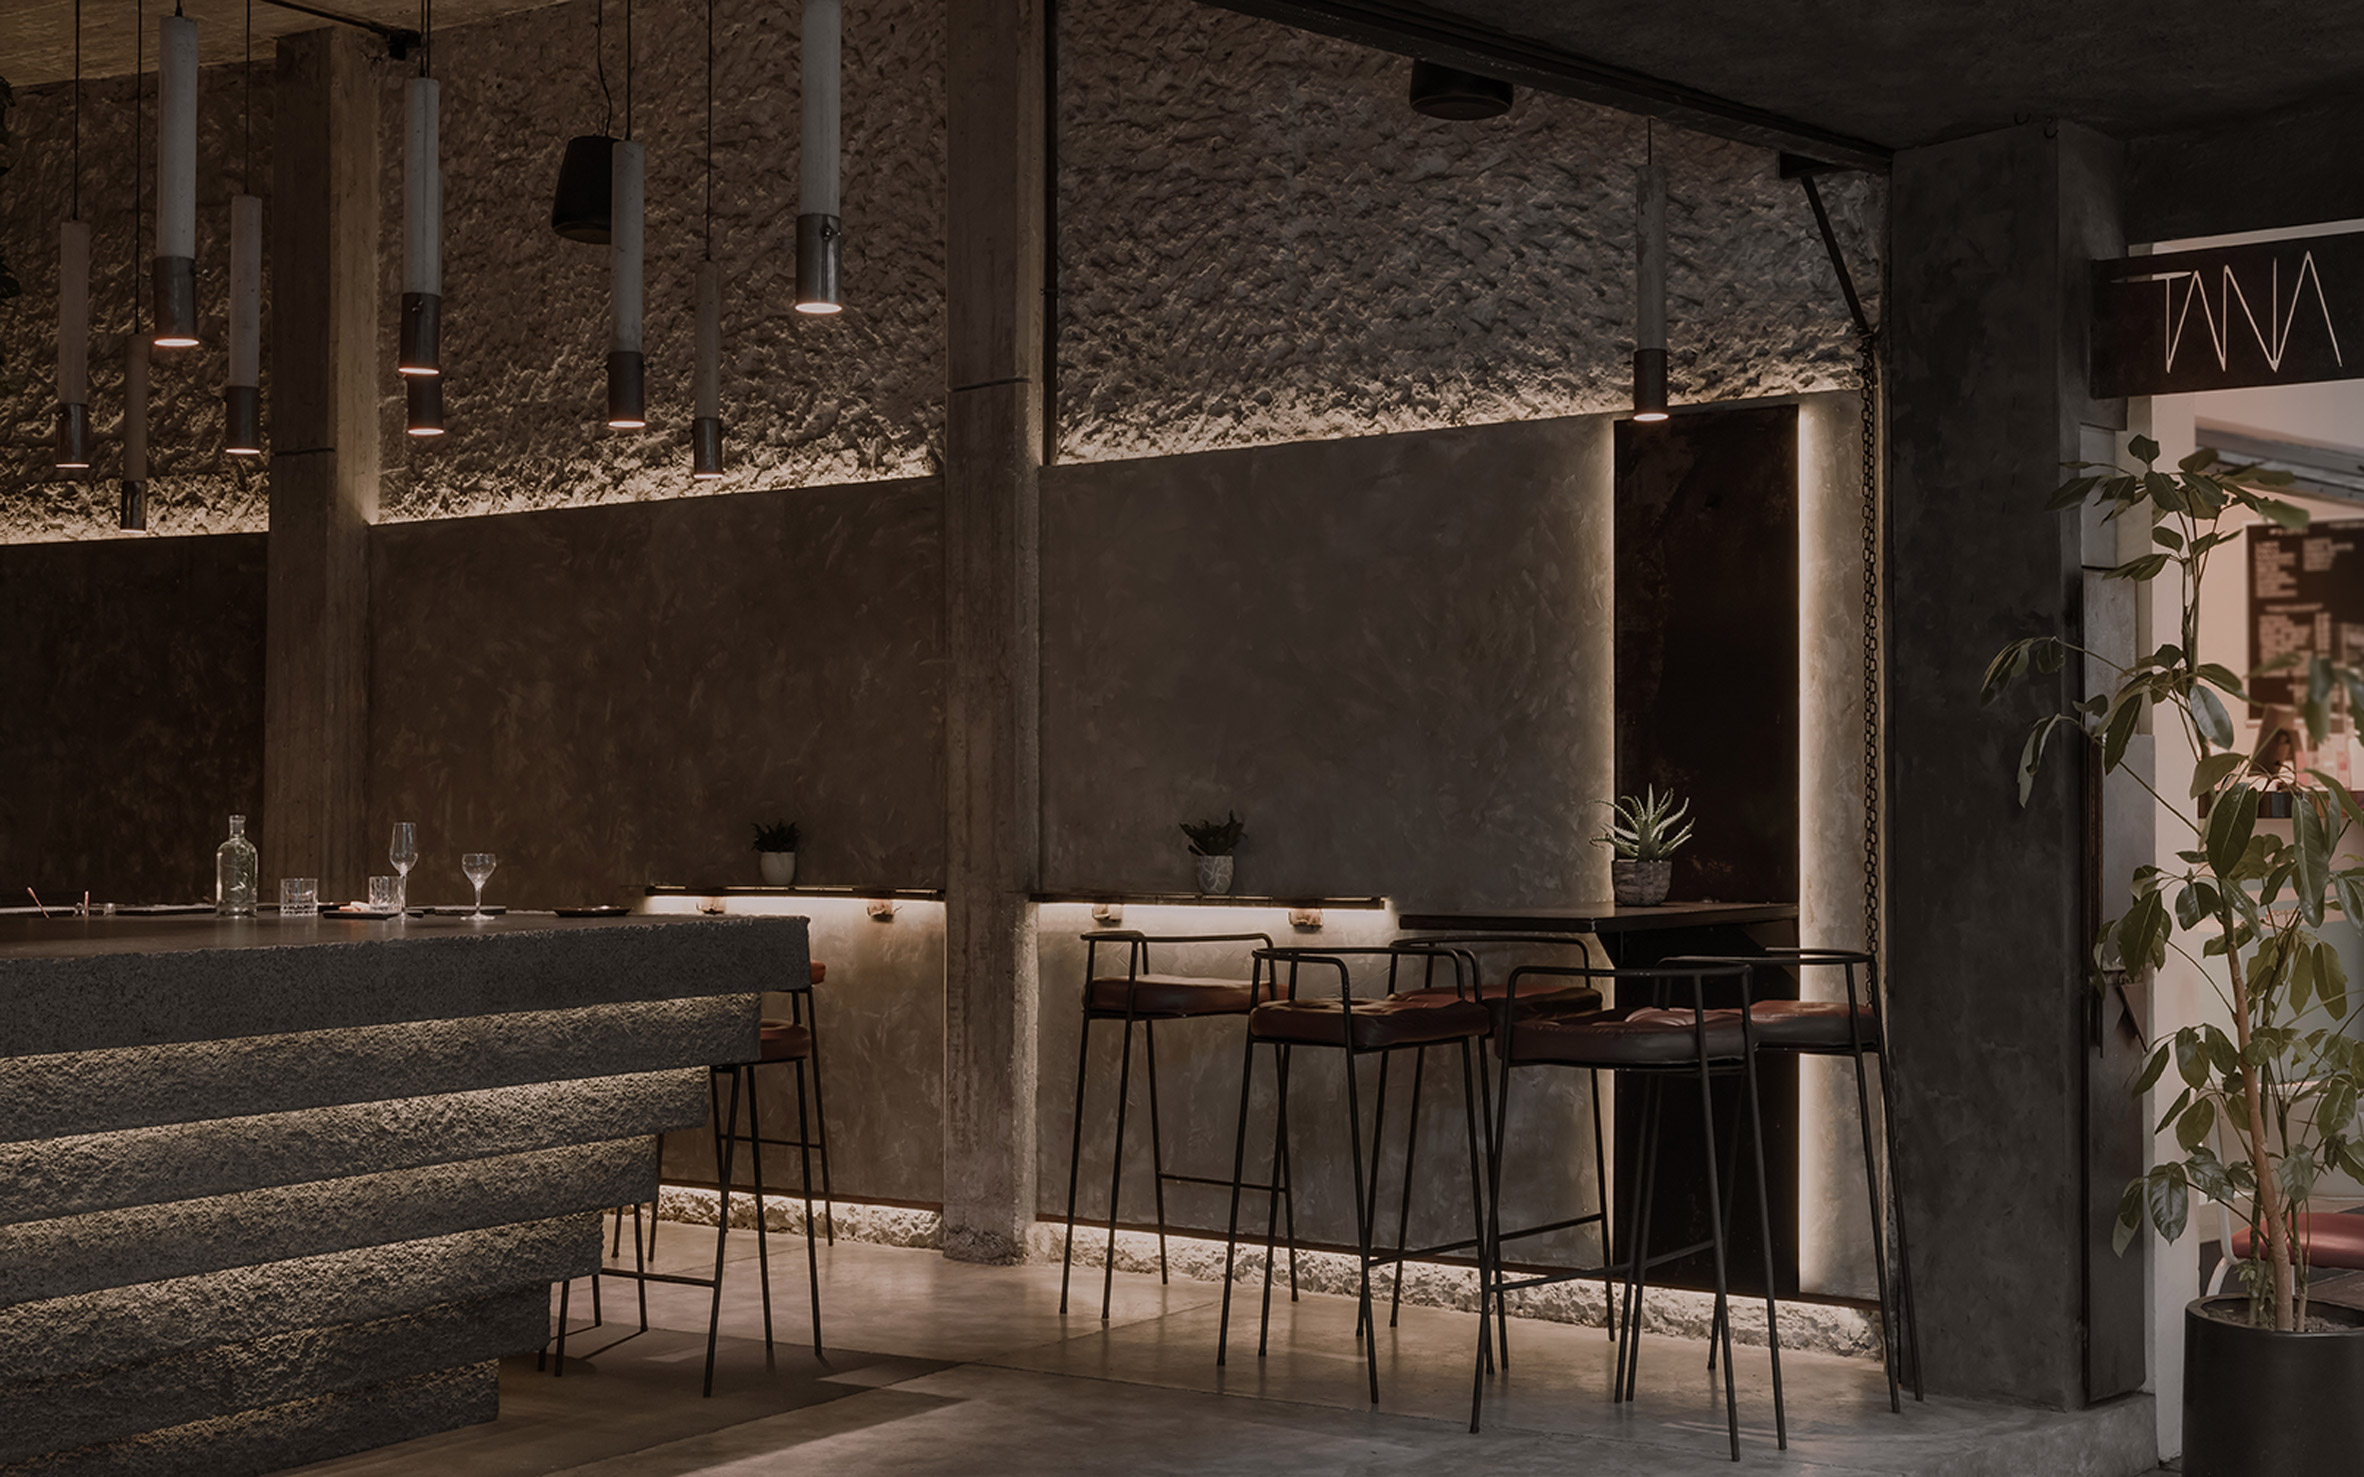 Cove-lit concrete walls with stools around small tables